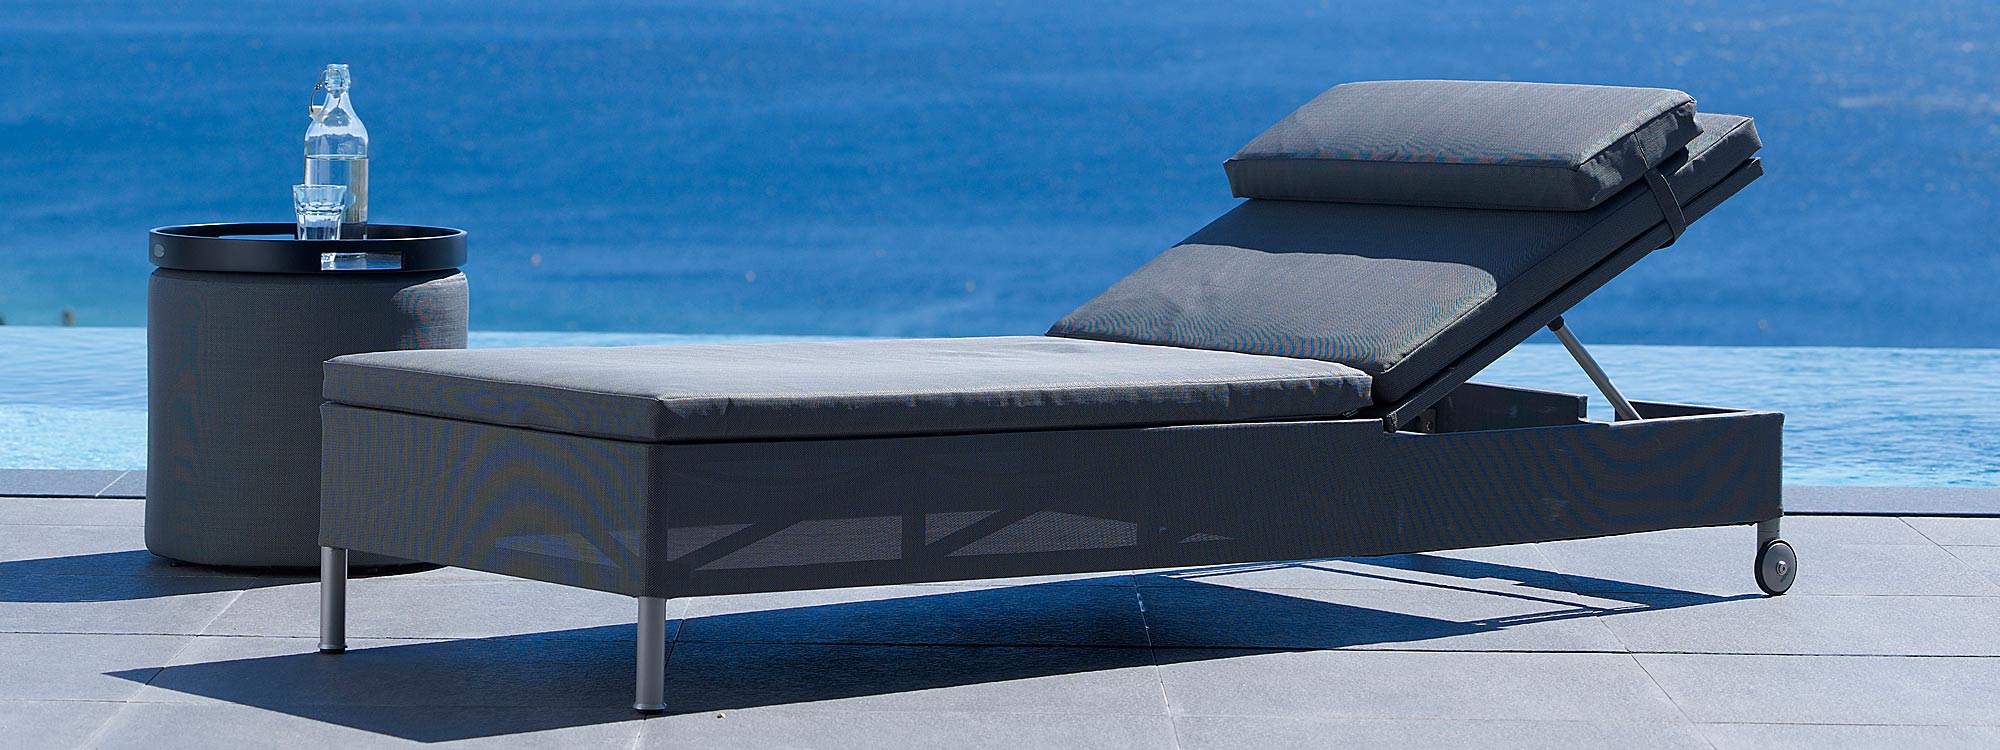 Image of Cane-line Rest sun lounger in Grey Cane-line Tex, with Grey Cane-line Natté cushion